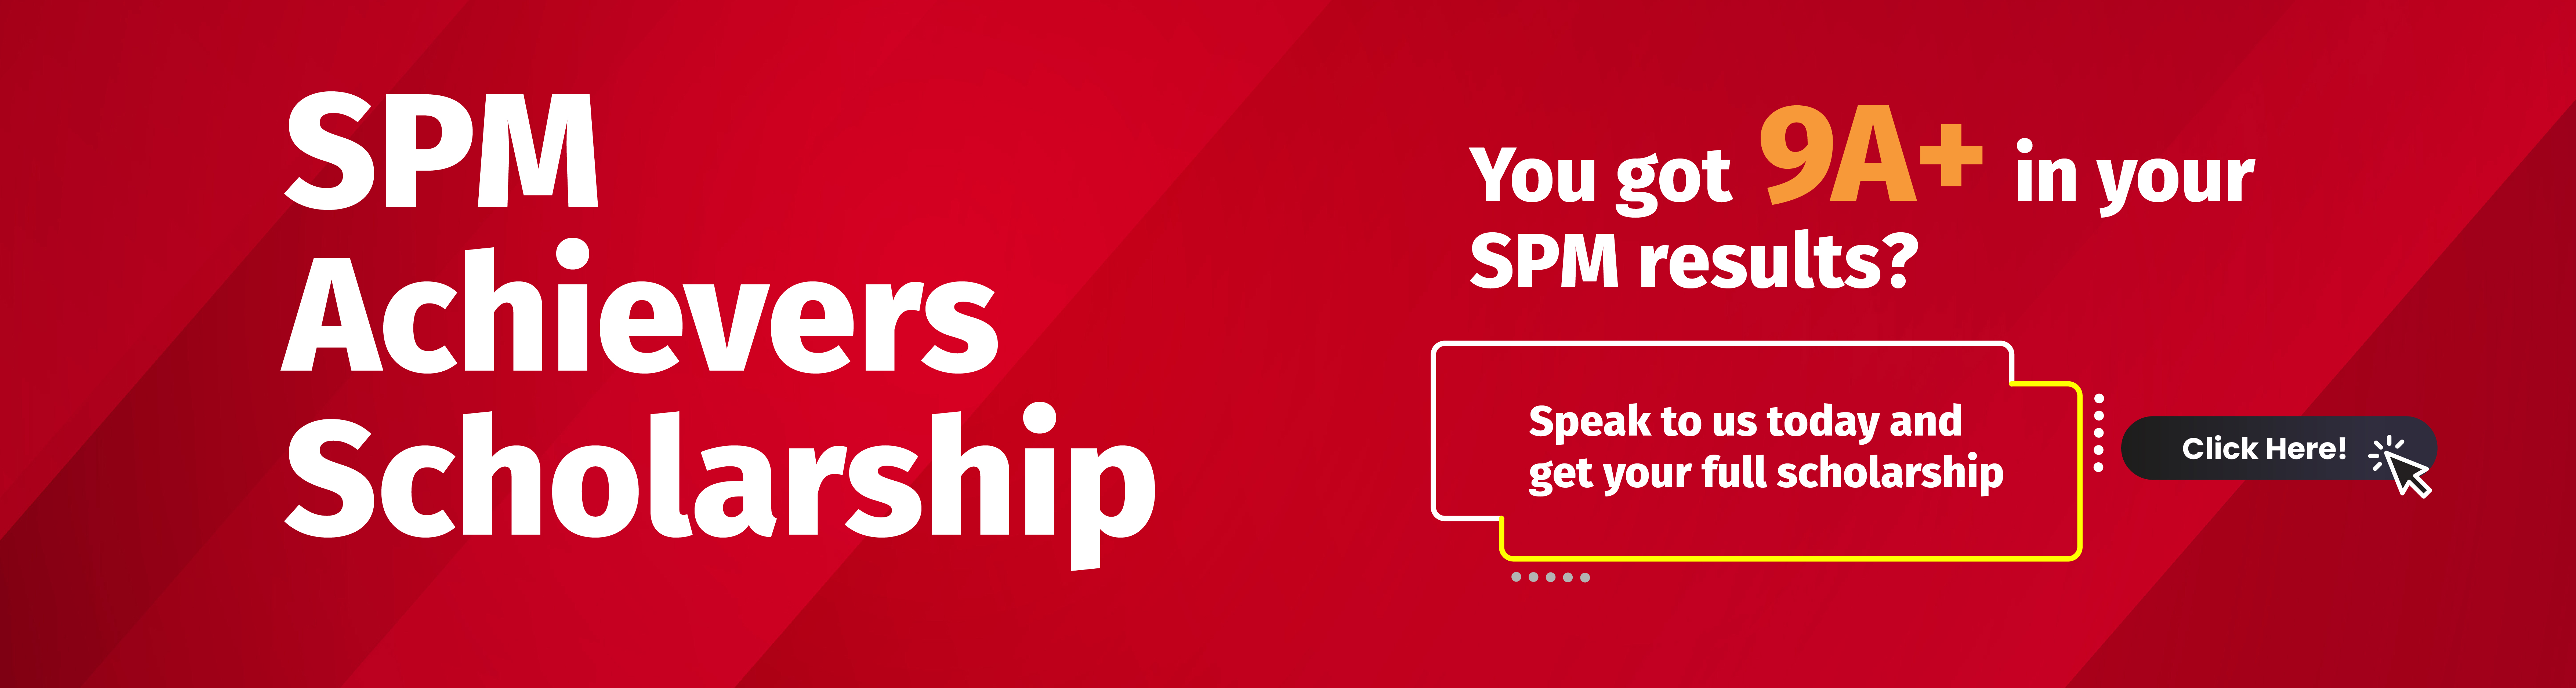 You got 9A+ in your SPM results?  Speak to us today and get your full scholarship